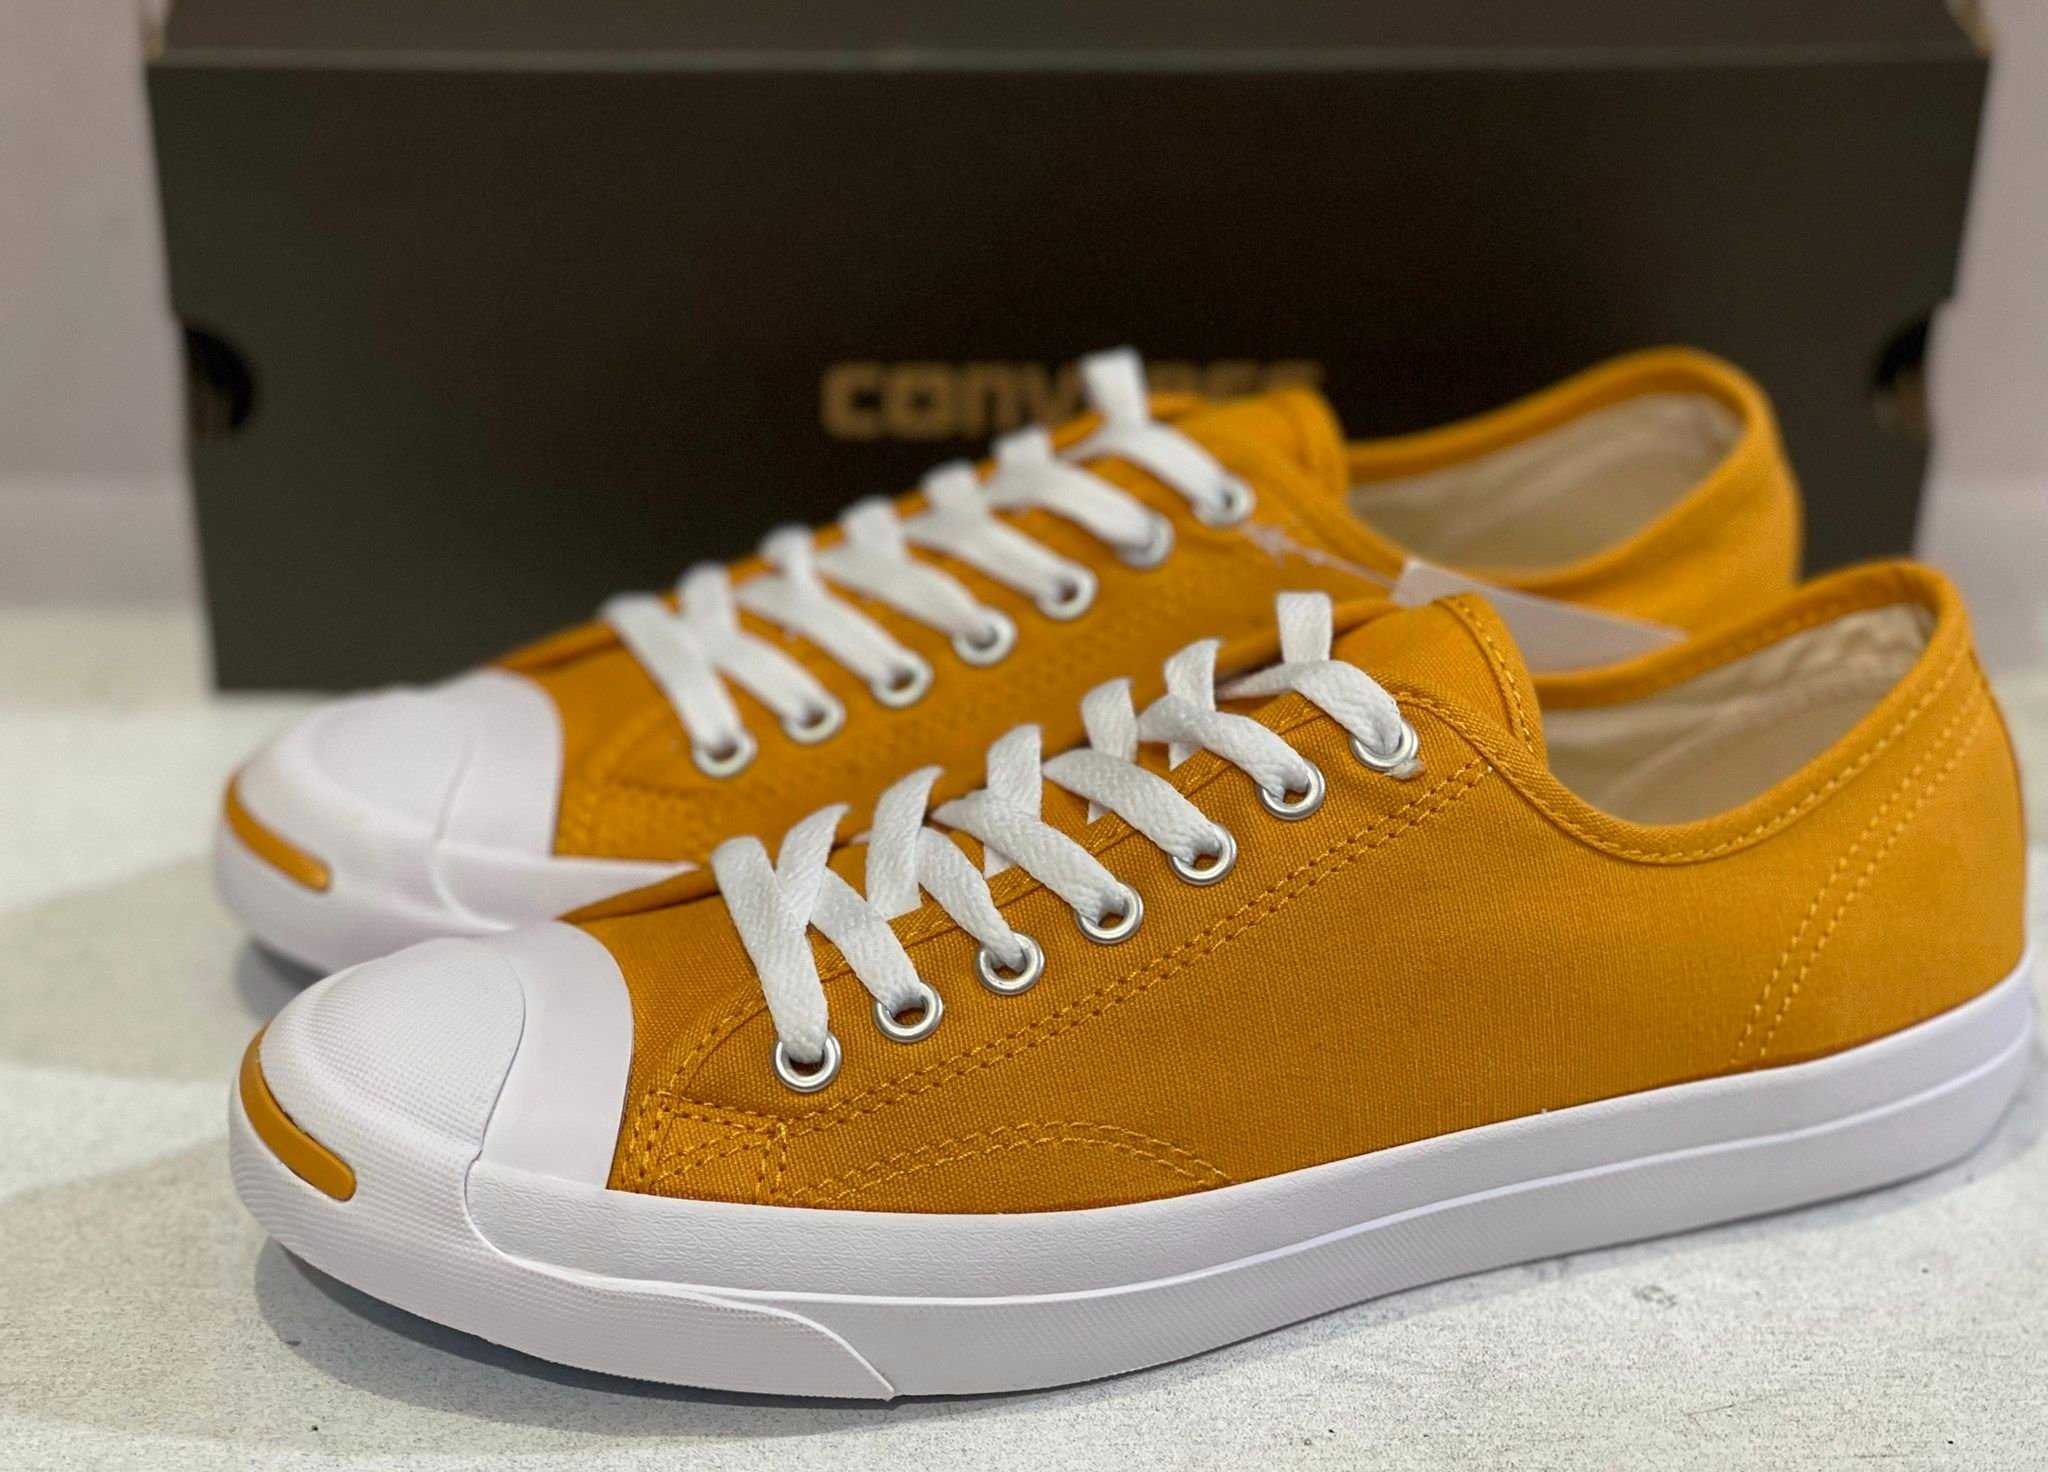 Converse Jack Purcell CP OX Made in Indonesia-Collection 2019 (สีเหลืองมัสตาร์ด)